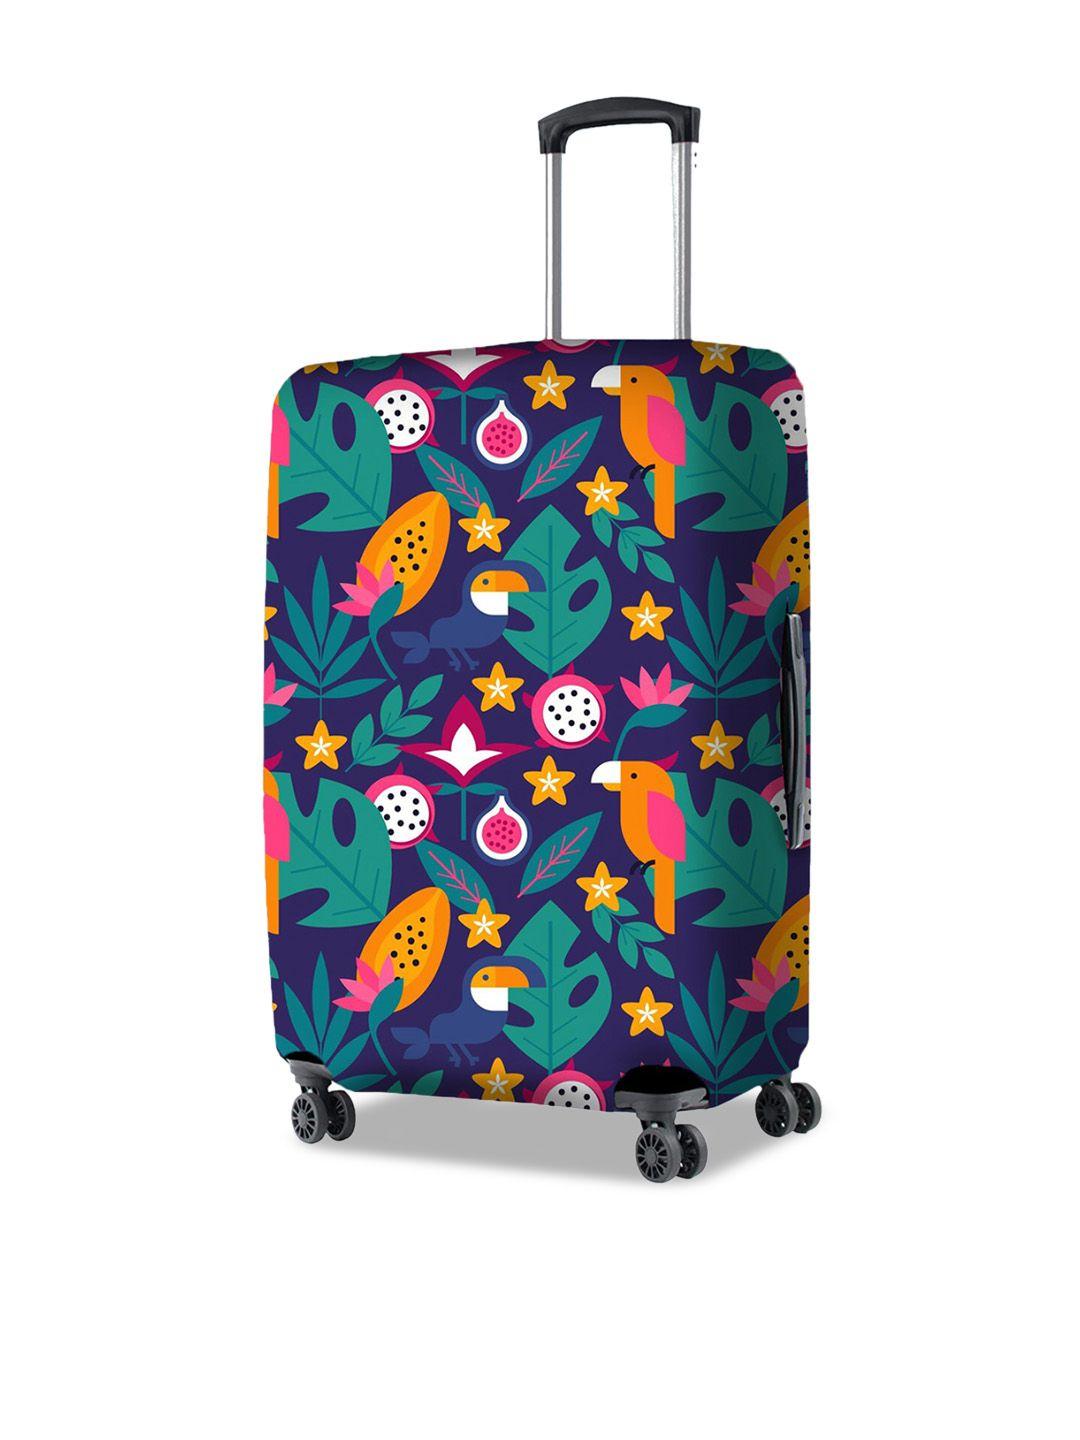 nasher miles conversational printed bag cover